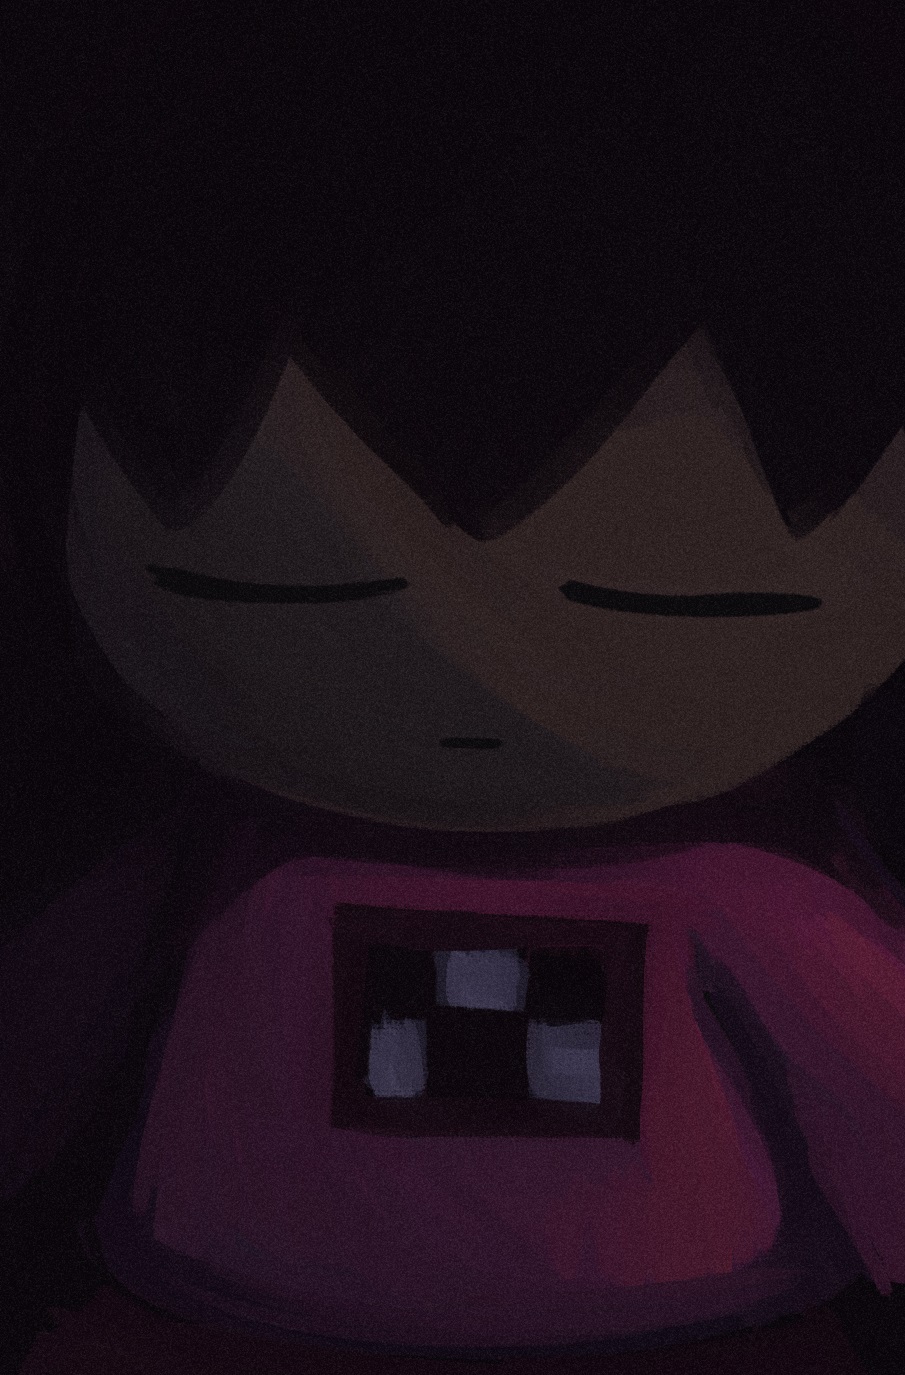 A painting of Madotsuki from Yume Nikki, referenced from a photo of a plush of the same character. The colors are very dark, with her hair blending into the background surrounding her.